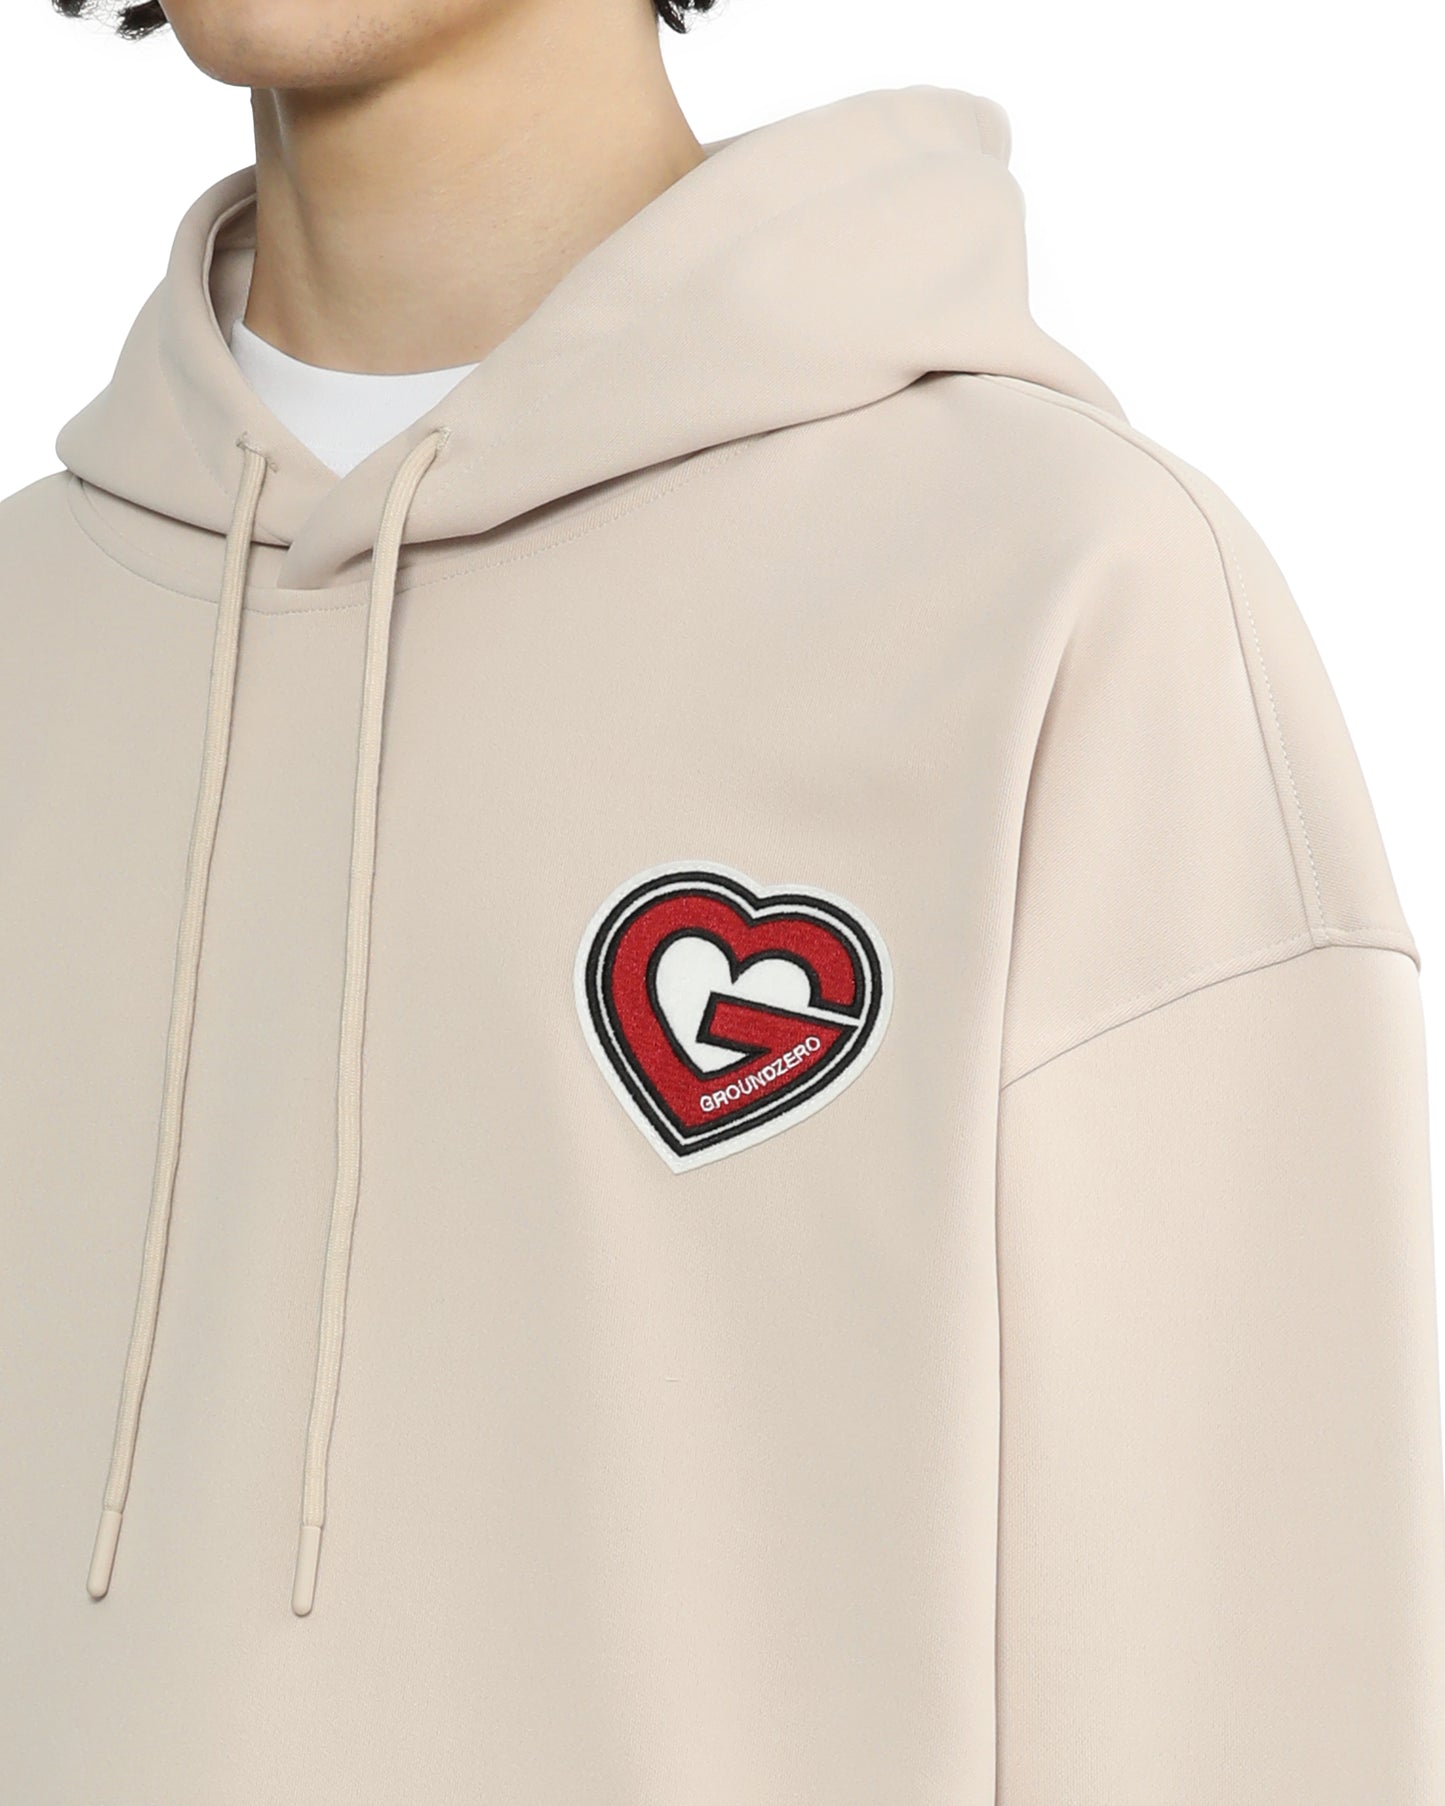 G-heart Patch Hoodie